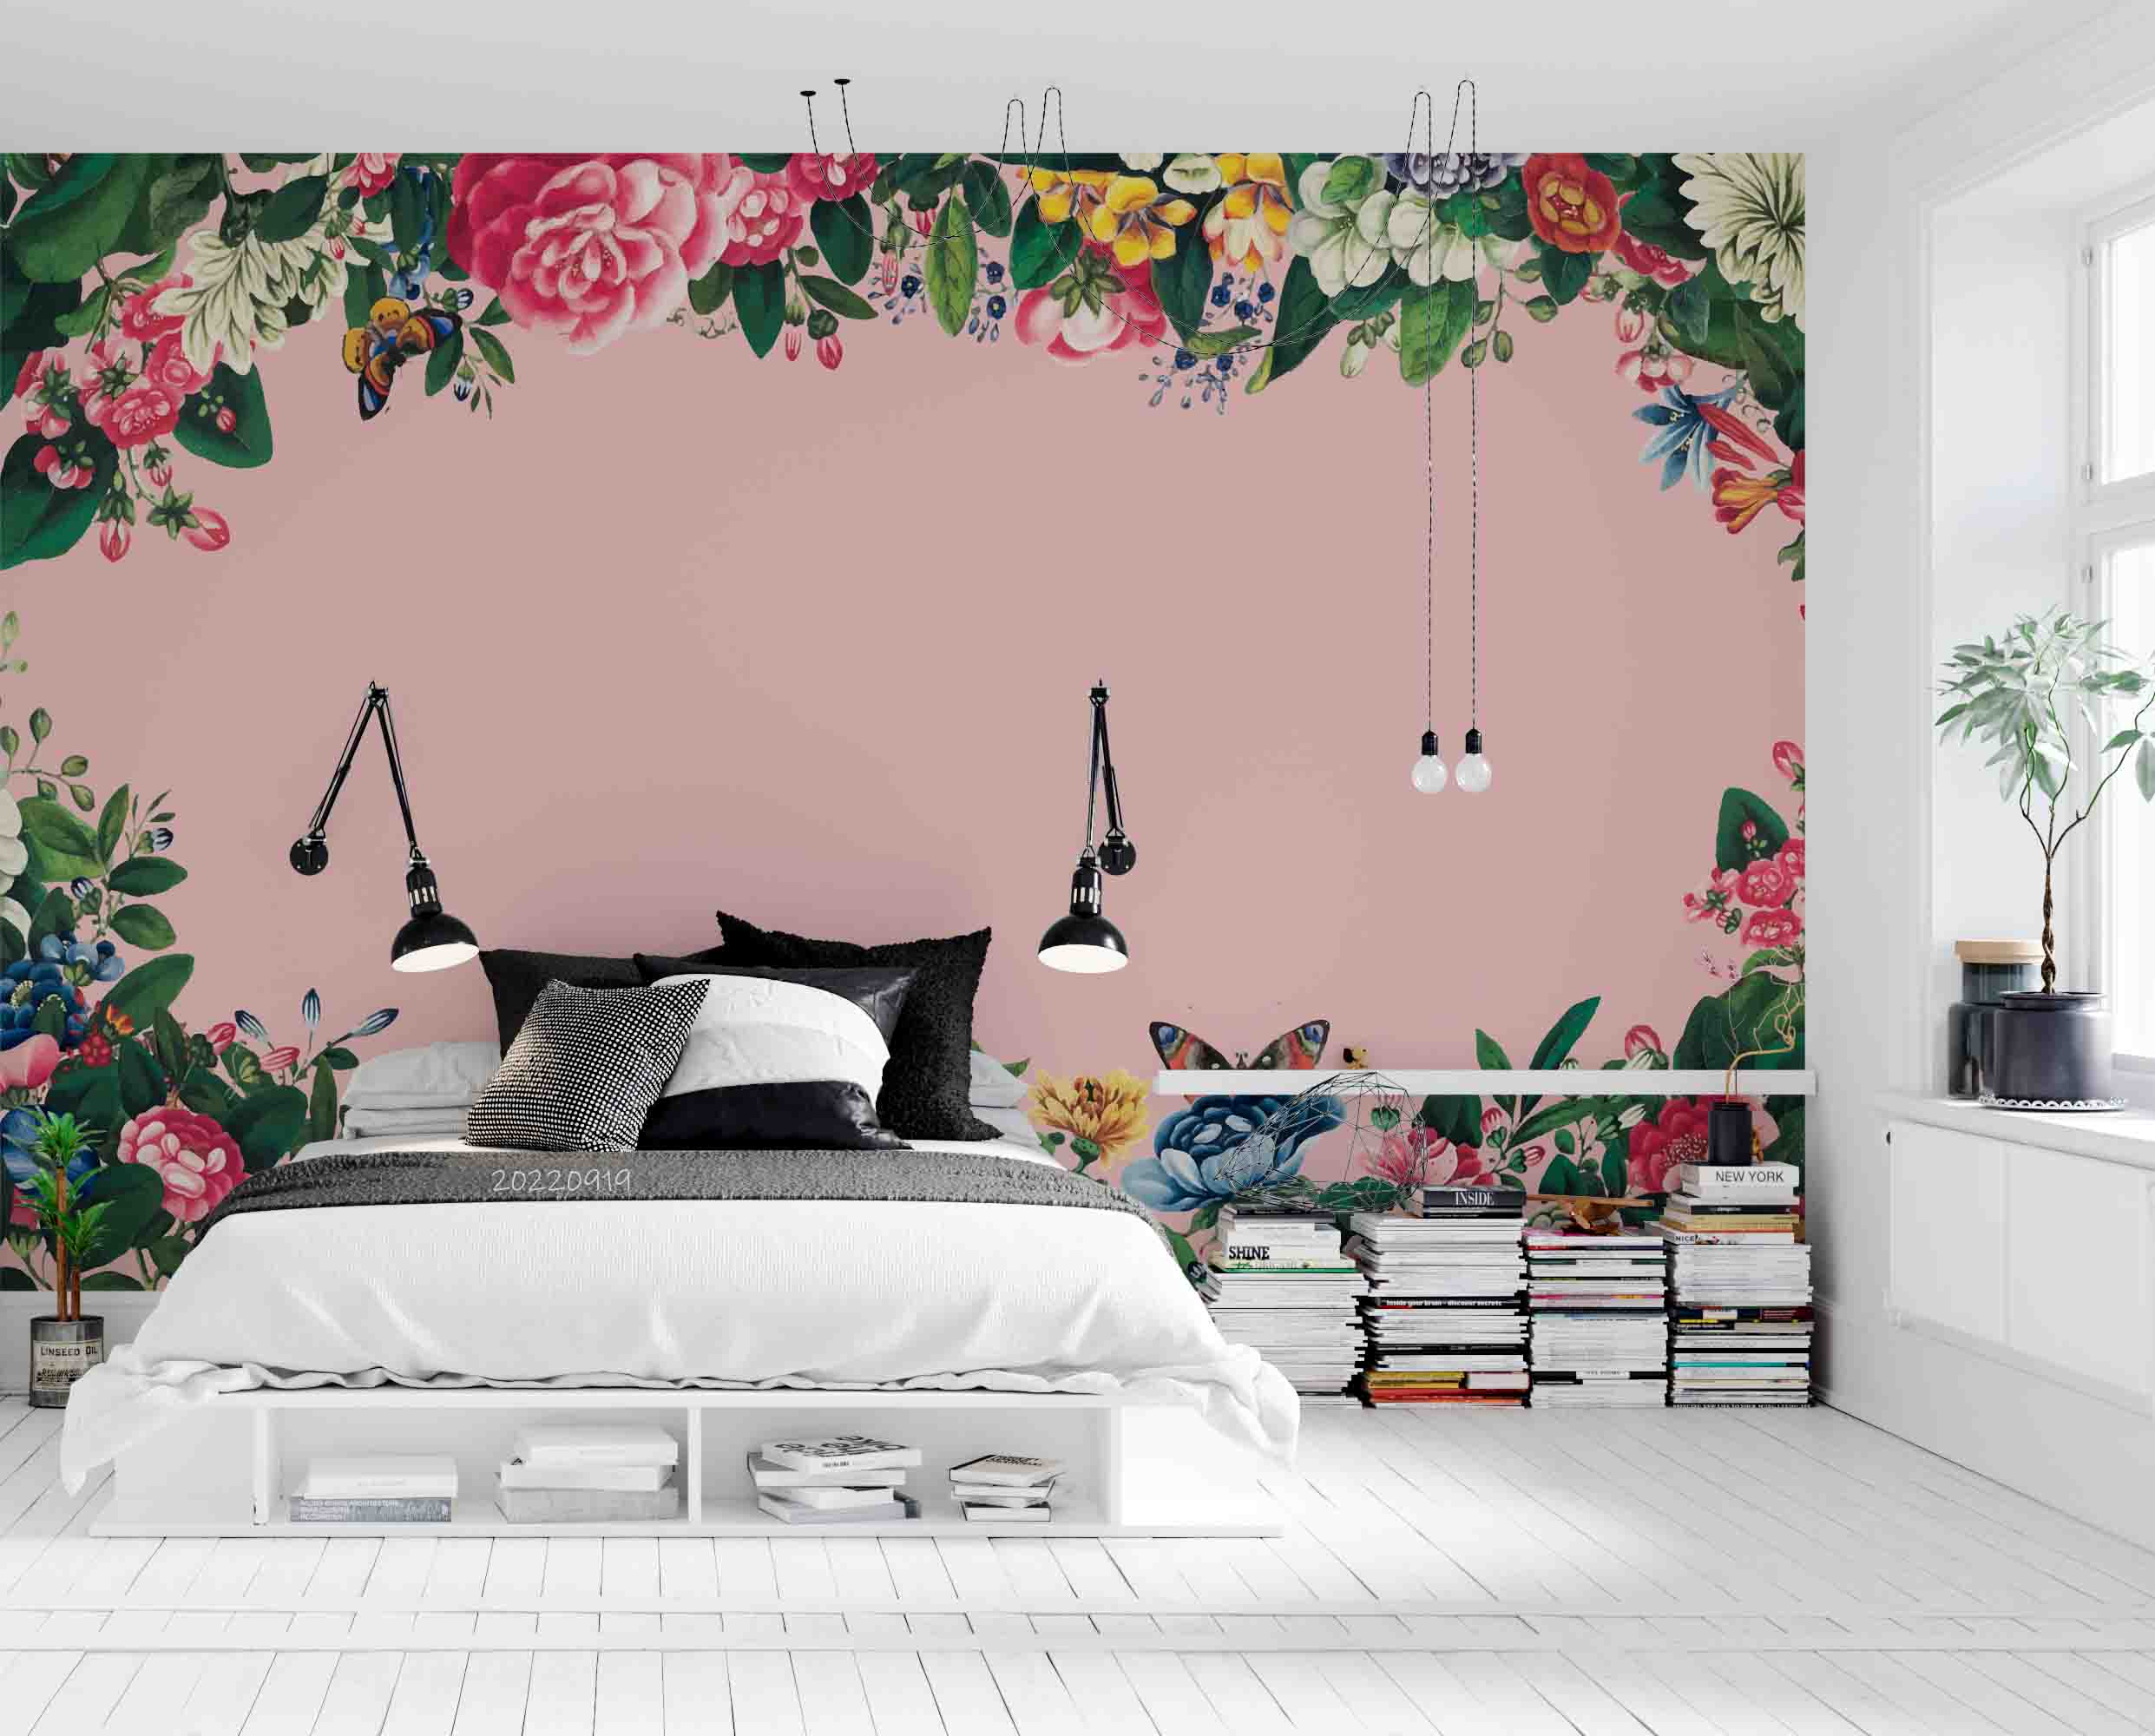 3D Vintage Mixed Chinese Floral Frame Wall Mural Wallpaper GD 3415- Jess Art Decoration